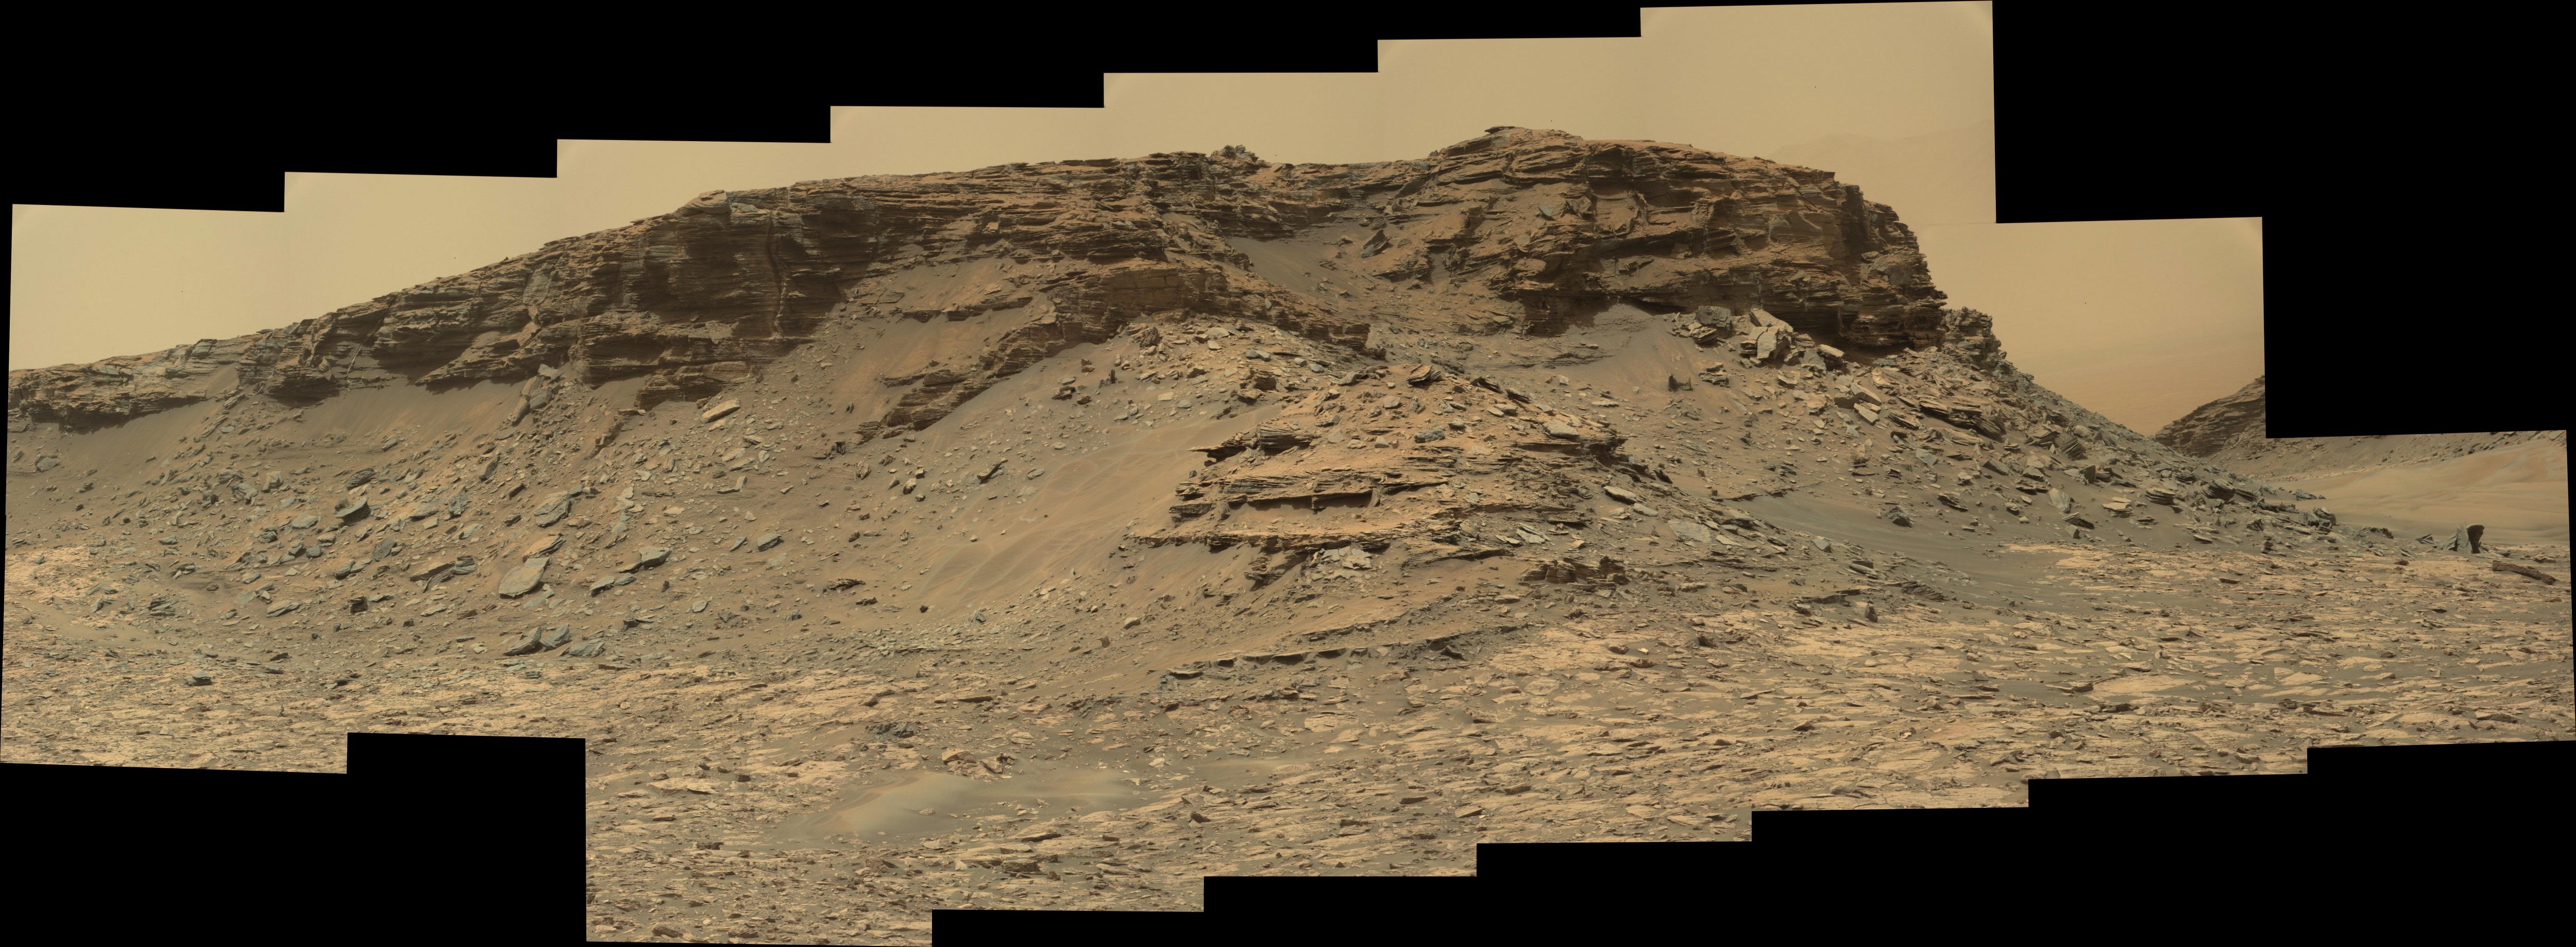 panoramic curiosity rover view 2 - sol 1448 - was life on mars